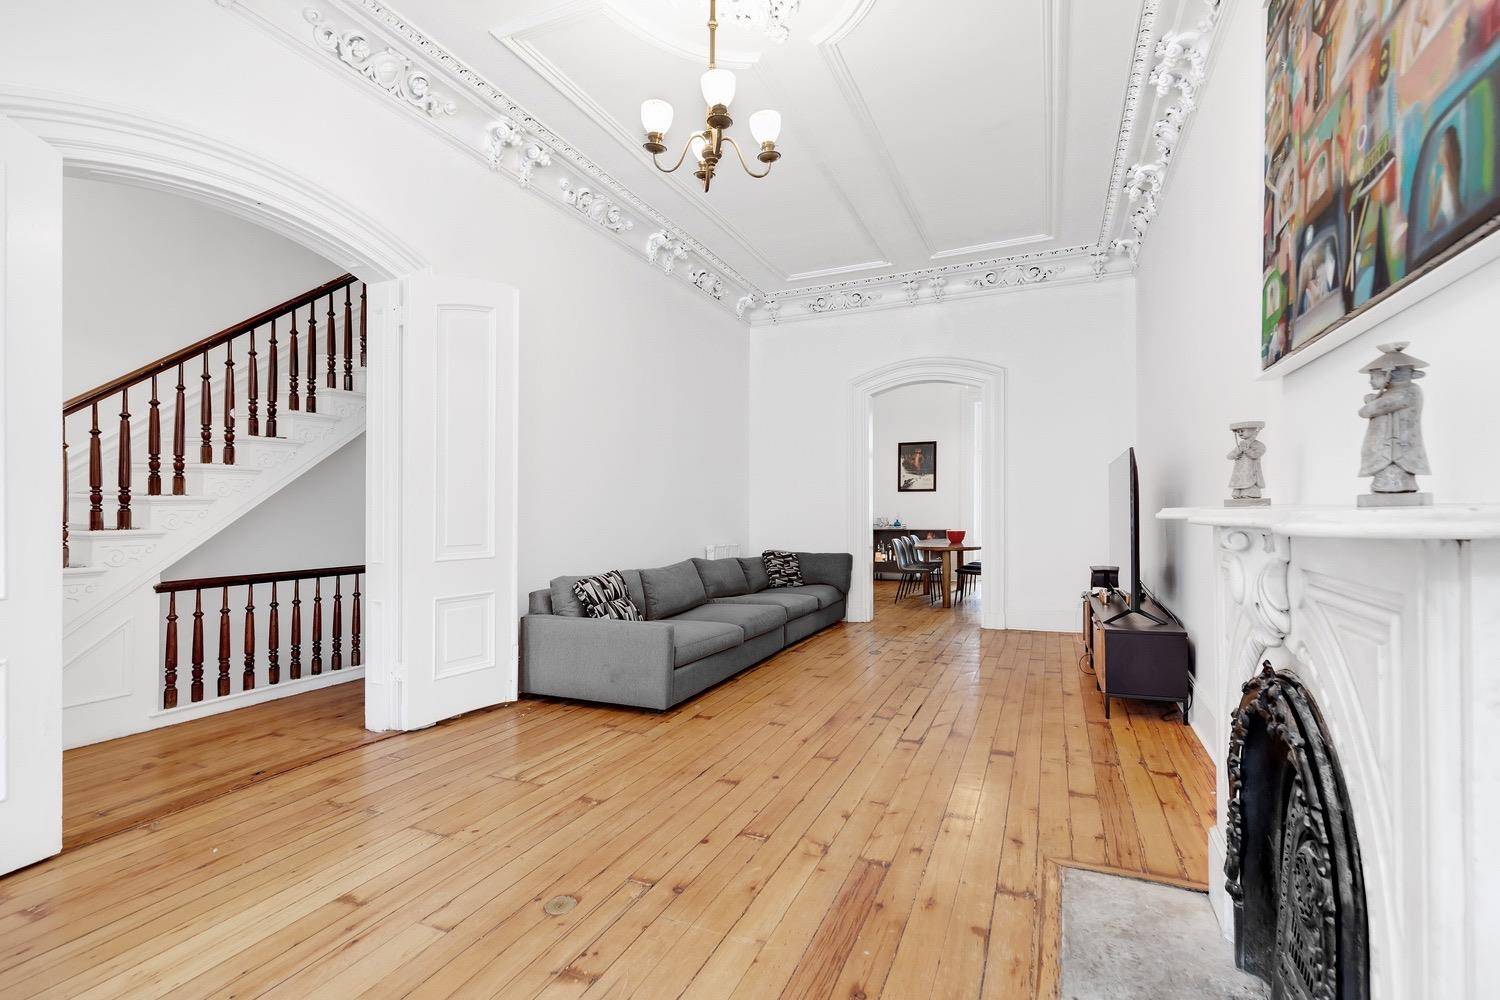 Live in this West Village beauty, available as an upper Parlor triplex.